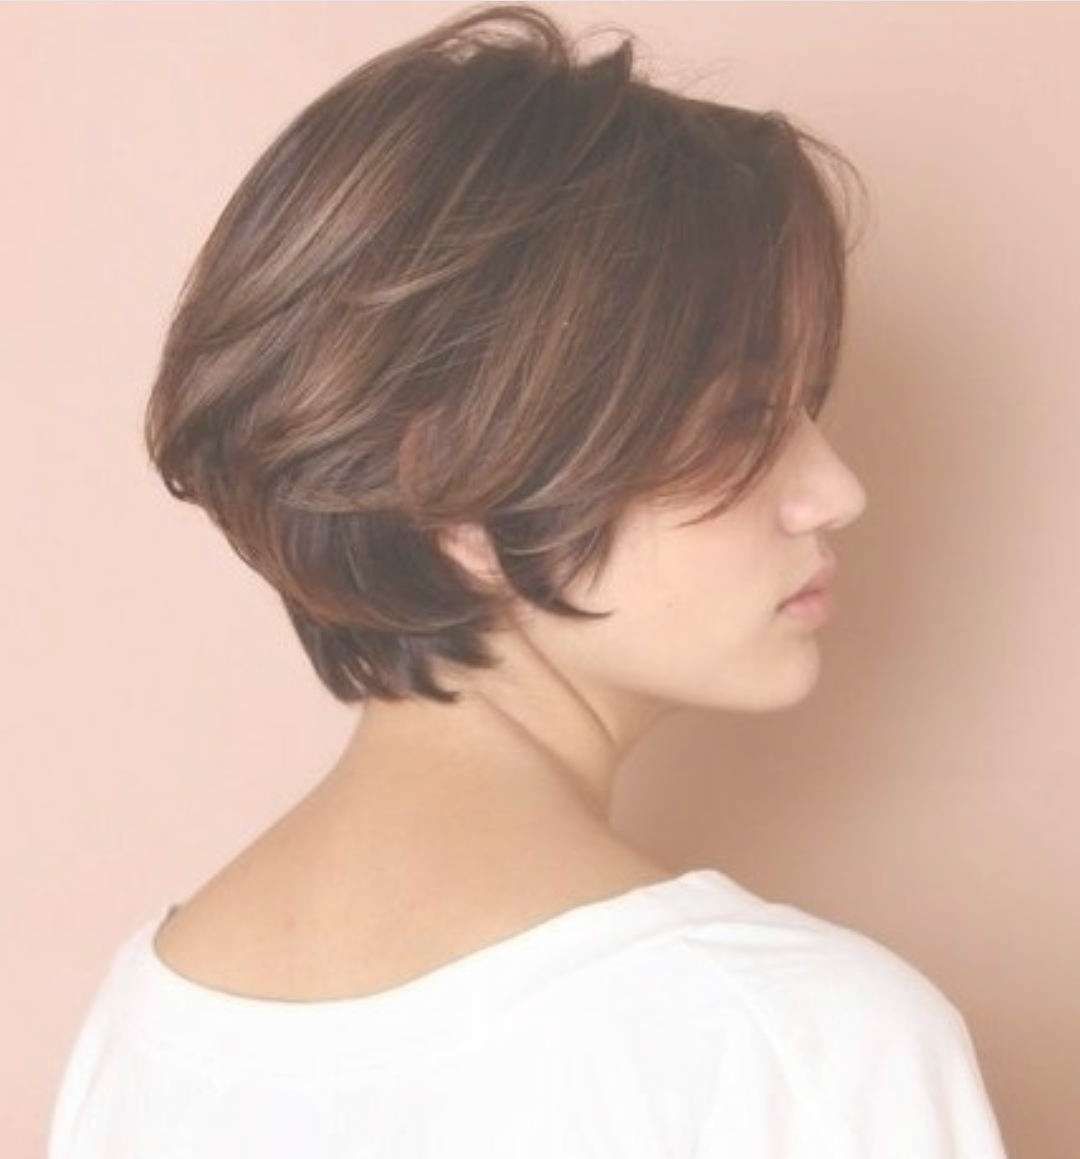 10 Chic Short Bob Haircuts That Balance Your Face Shape! – Short Pertaining To Most Popular Bob And Pixie Hairstyles (View 3 of 16)